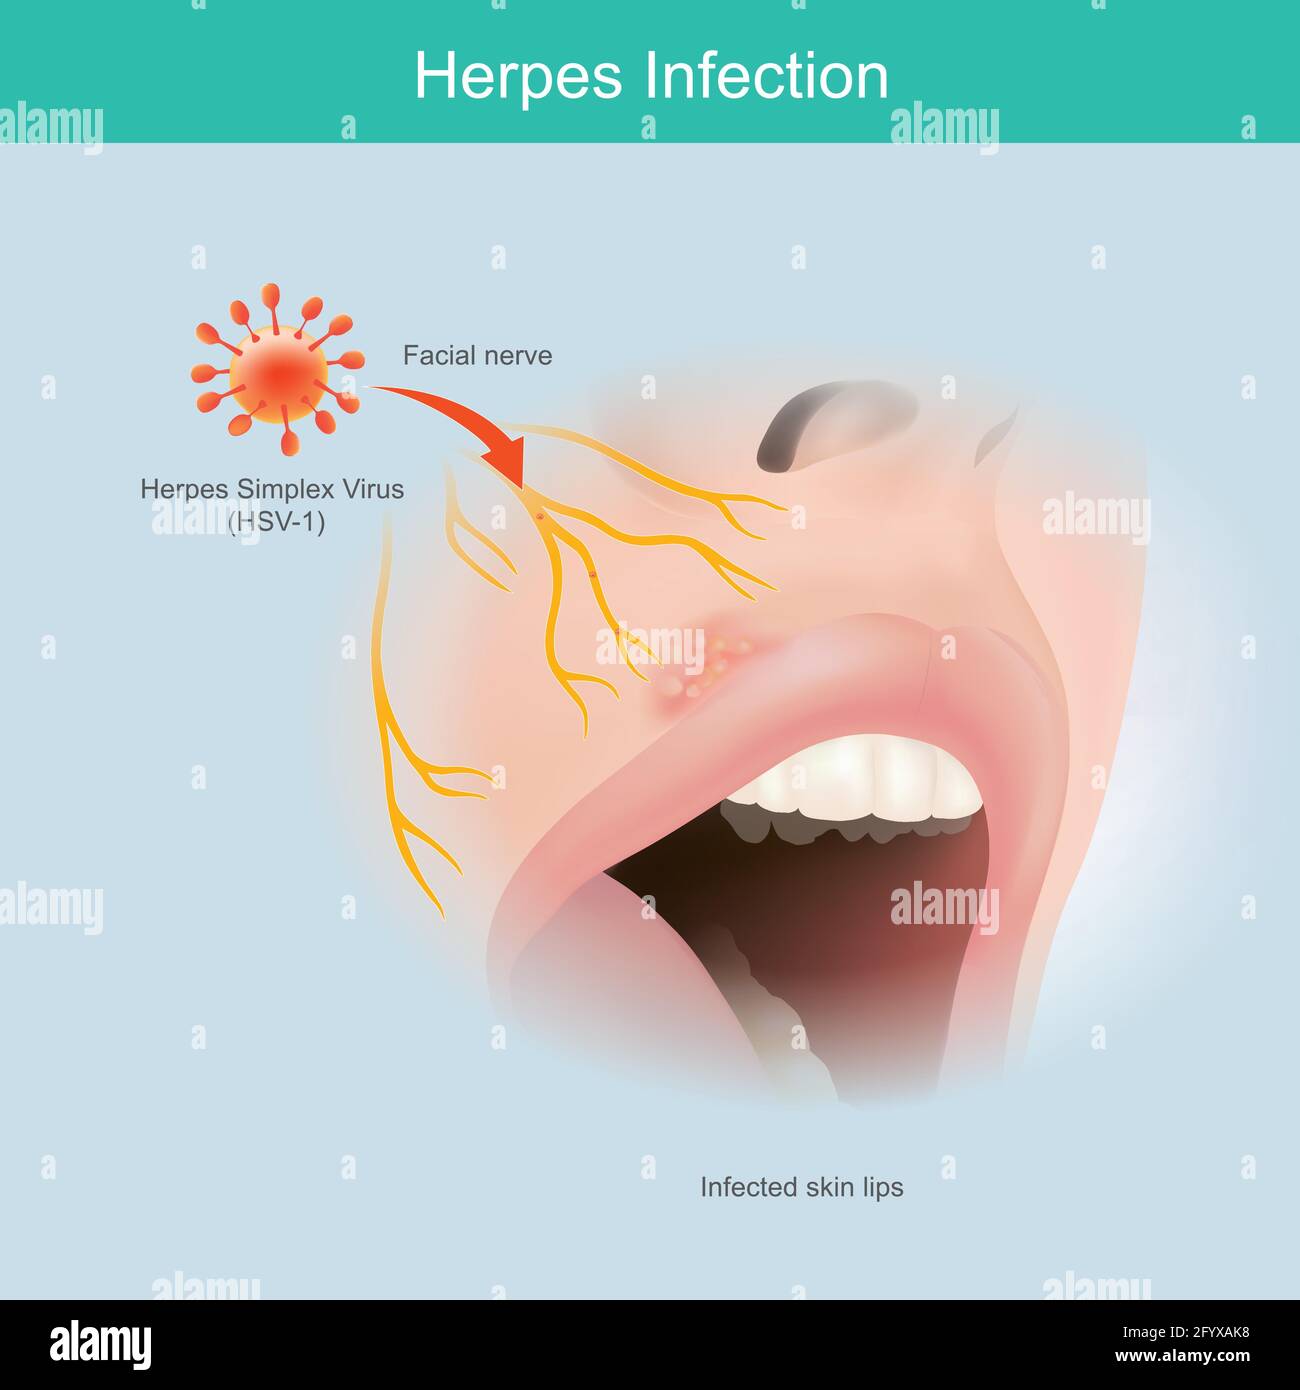 Herpes Infection. Illustration human facial nerve skin for use explain herpes simplex virus lip infection. Stock Vector